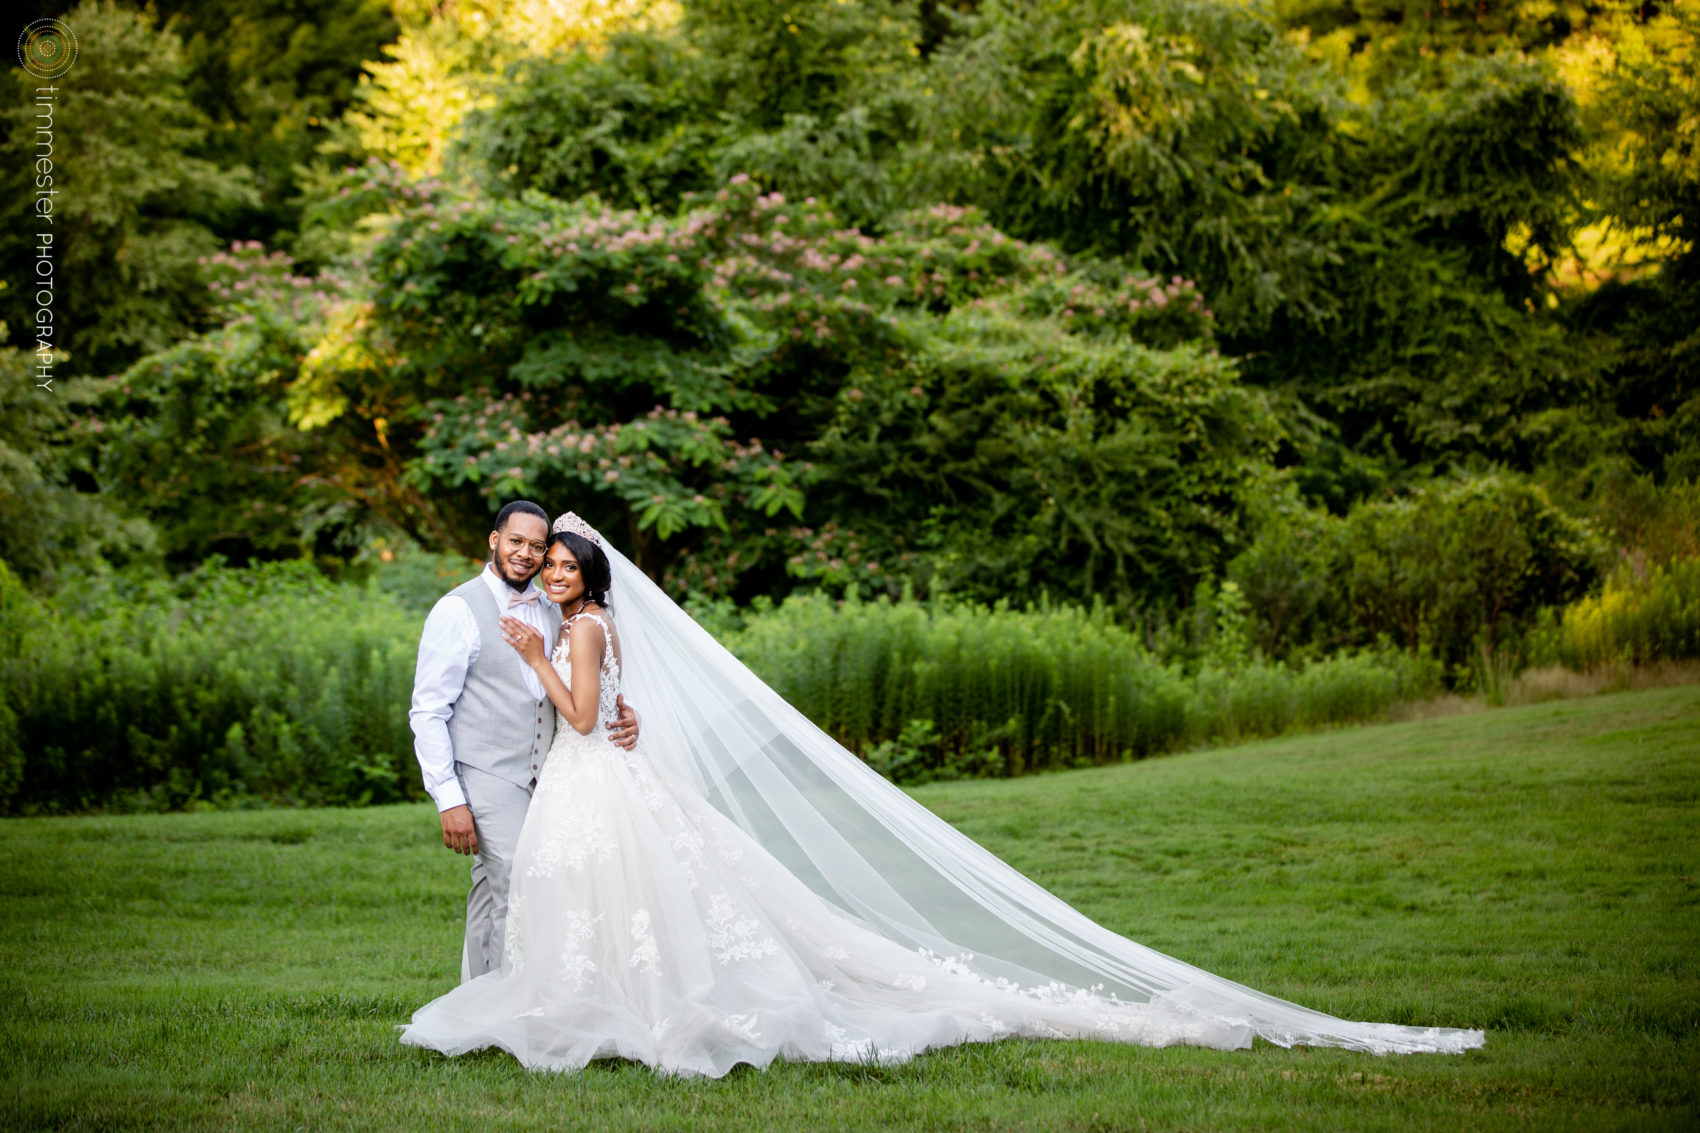 Bride and groom portraits and wedding at Highgrove Estate in Fuquay-Varina, NC